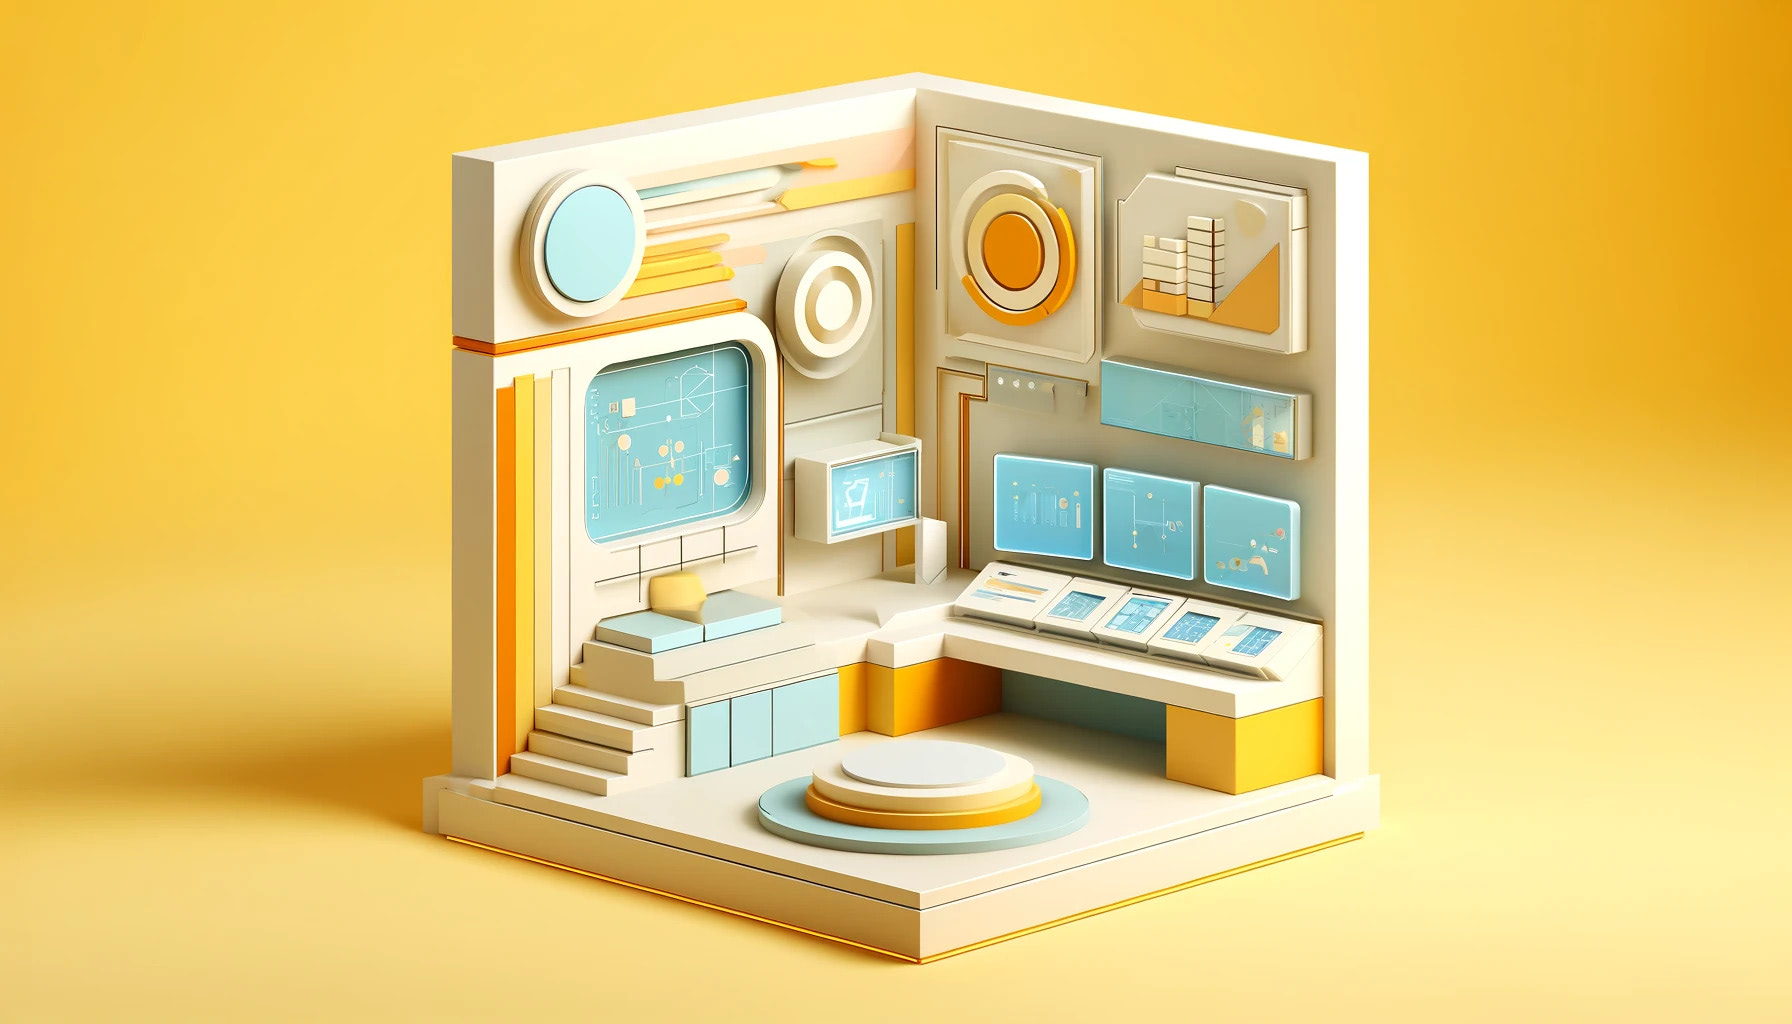 Abstract and minimalistic 3D command centre in joyful summer colors, featuring streamlined geometric designs with high-tech elements.